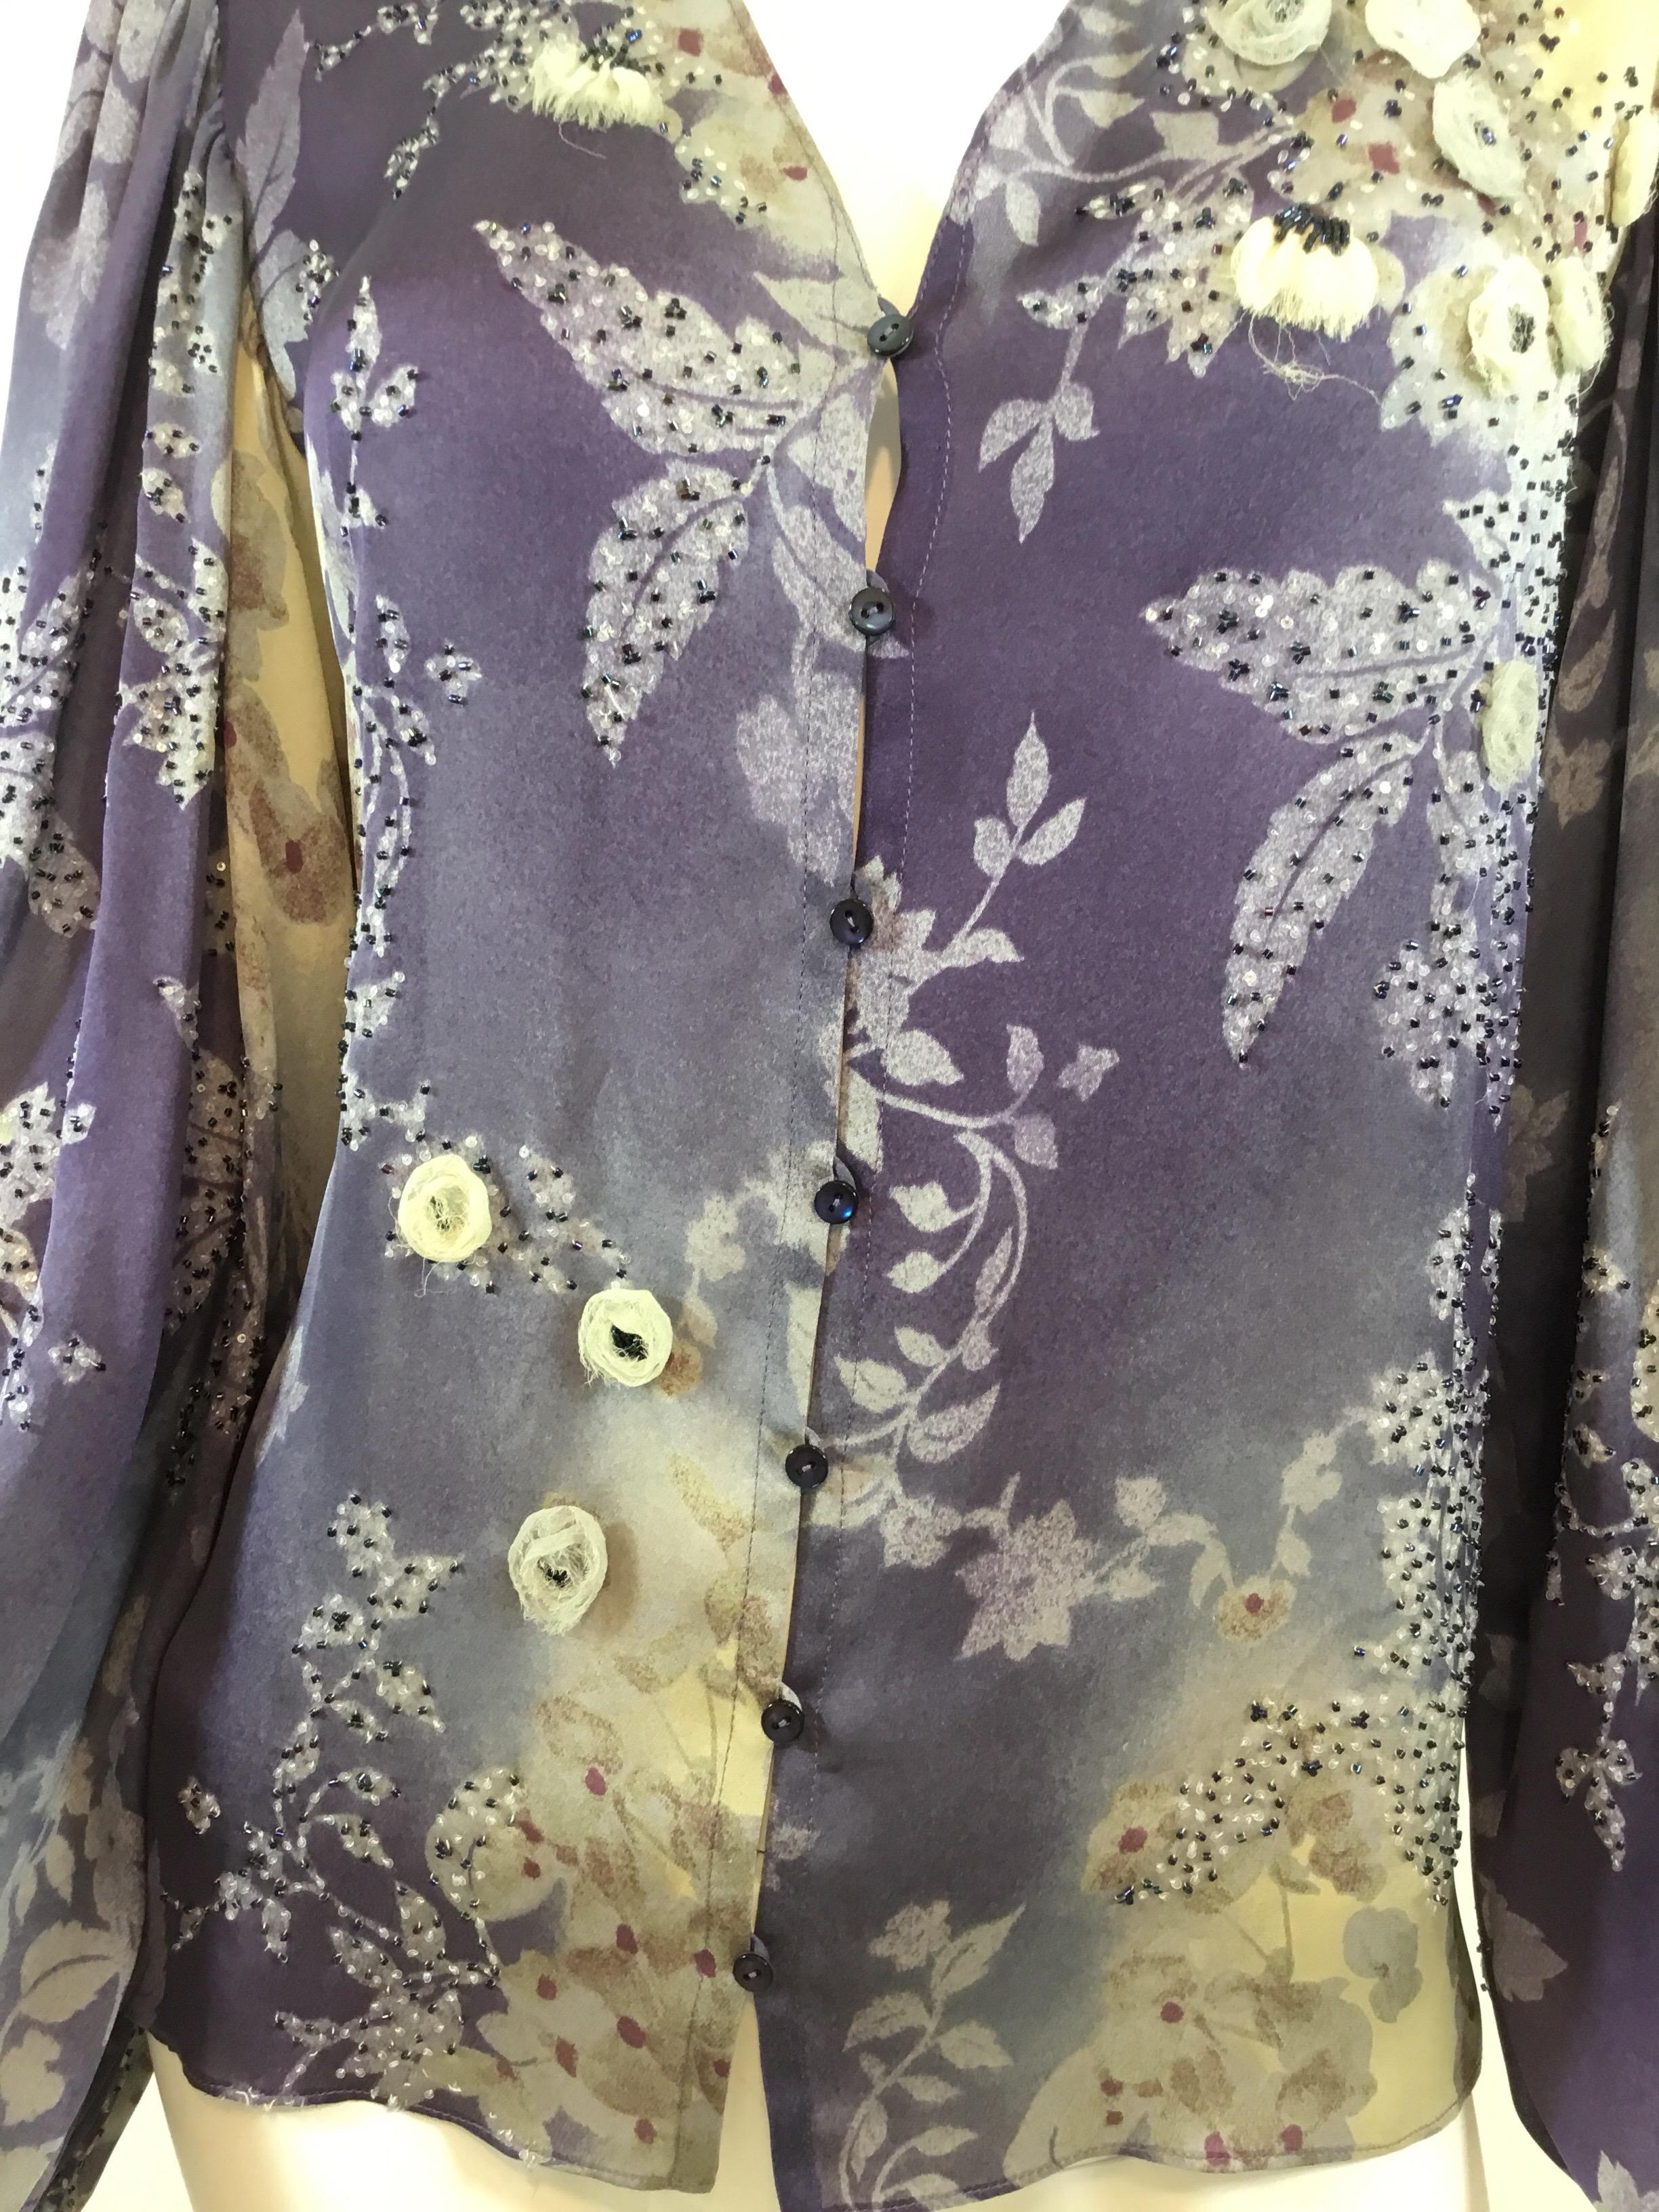 Chloé Silk blouse is featured in a blue/purple with seed bead and sequin embellishing throughout, buttoned fastenings, and billow sleeves with elasticized cuffs. Blouse is labeled a size 38, made in France, 100% silk.

Bust 36”, sleees 28”, length